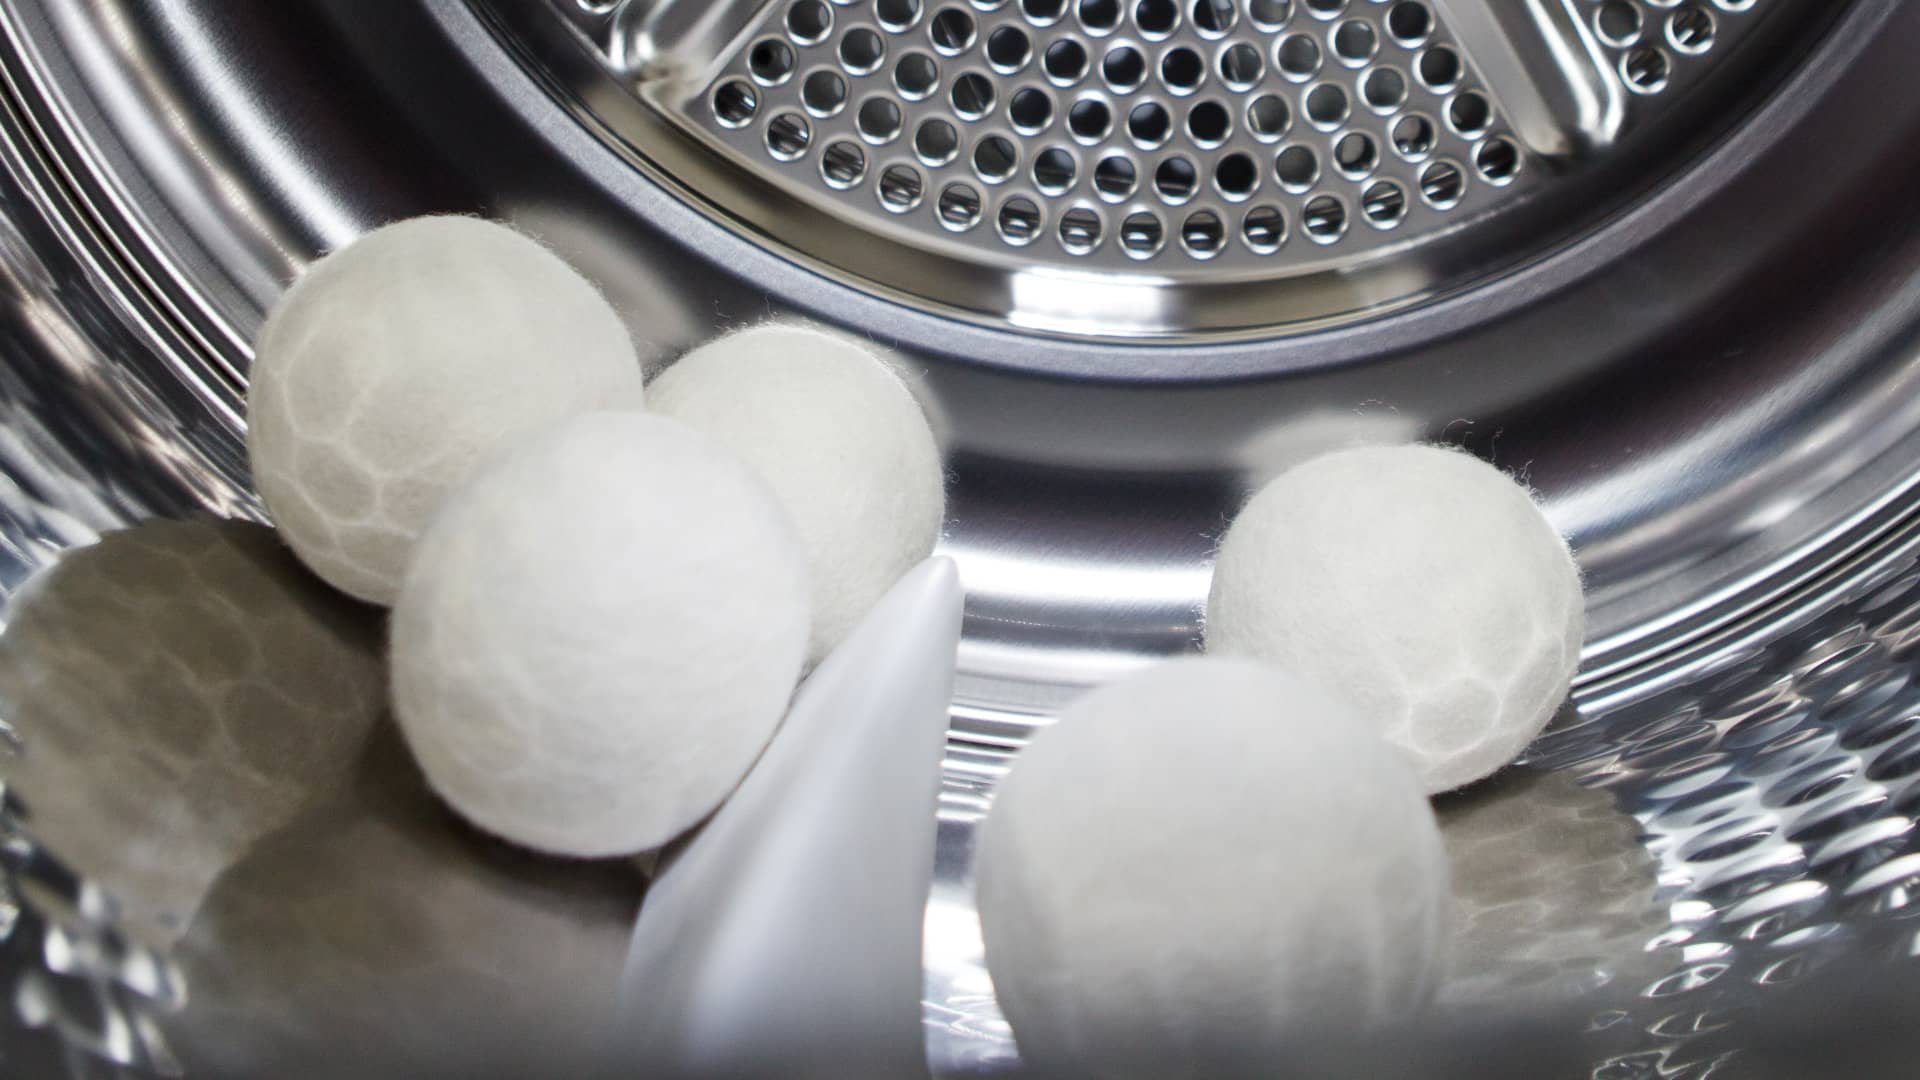 Featured image for “Do Dryer Balls Work? The Pros and Cons”